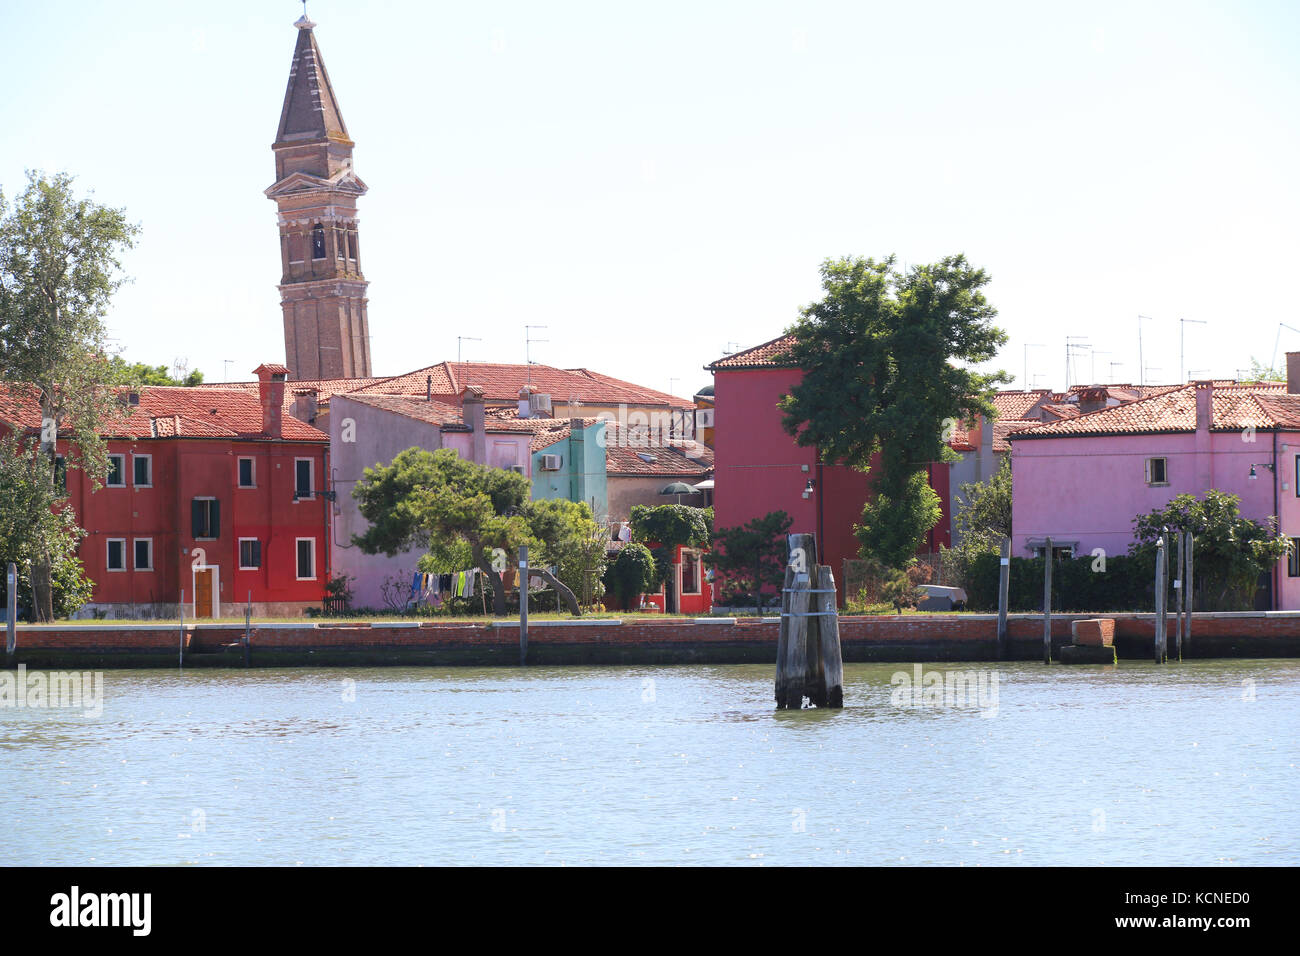 Burano is a small island near Venice in Italy. The bell tower is pending and the houses are very colorful Stock Photo